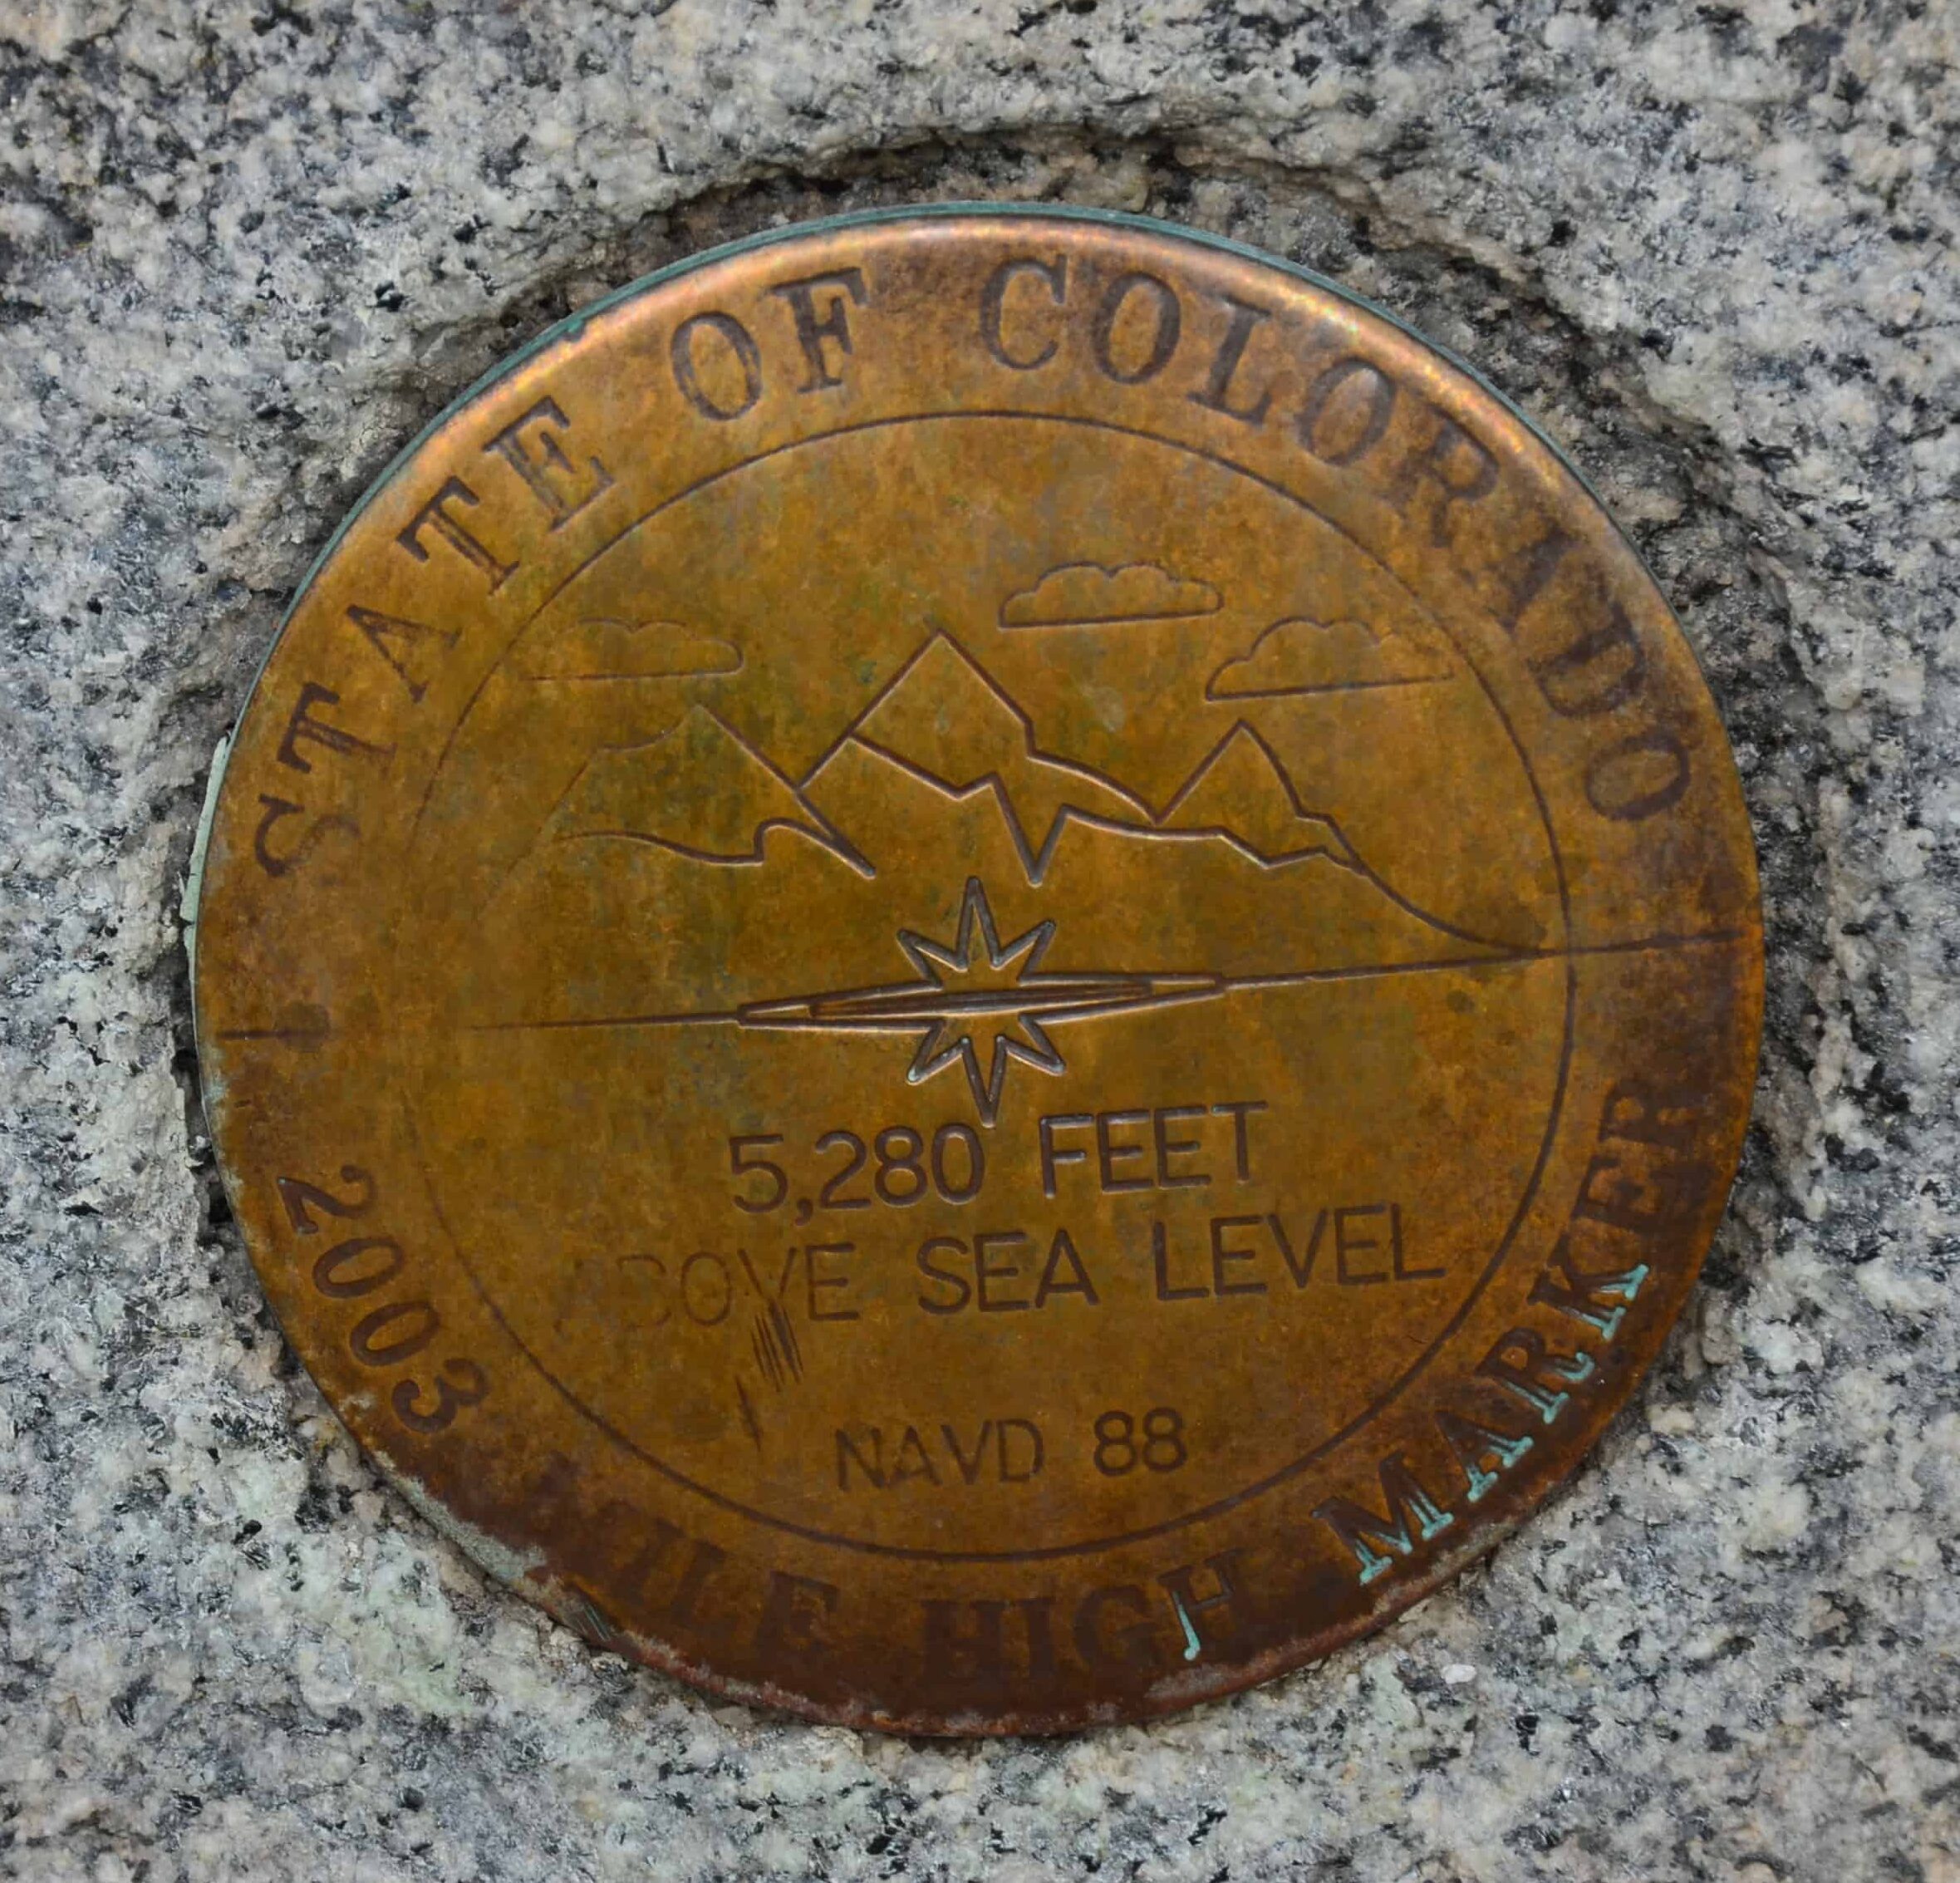 Mile high marker at the Colorado State Capitol